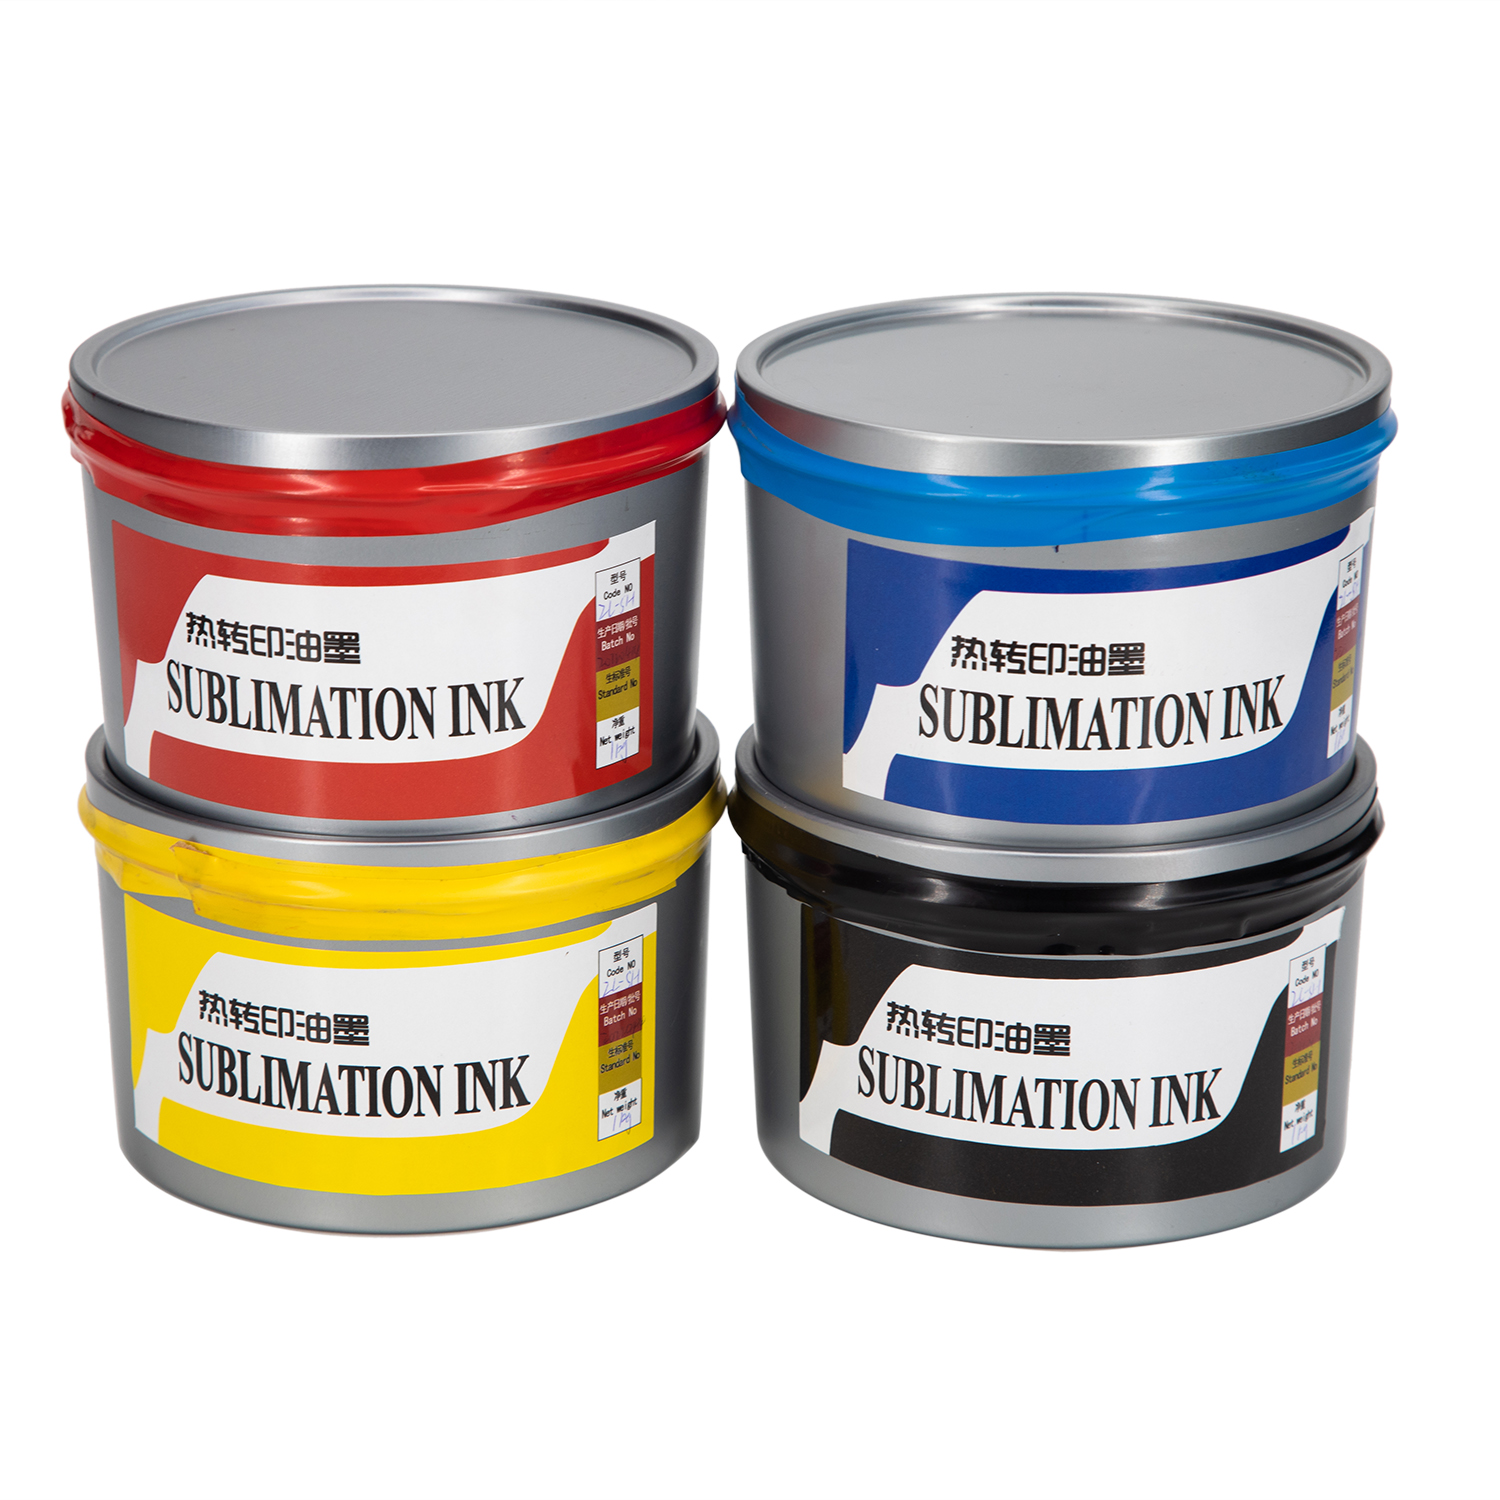 fluorescent dye sublimation ink about litho transfer printing ink